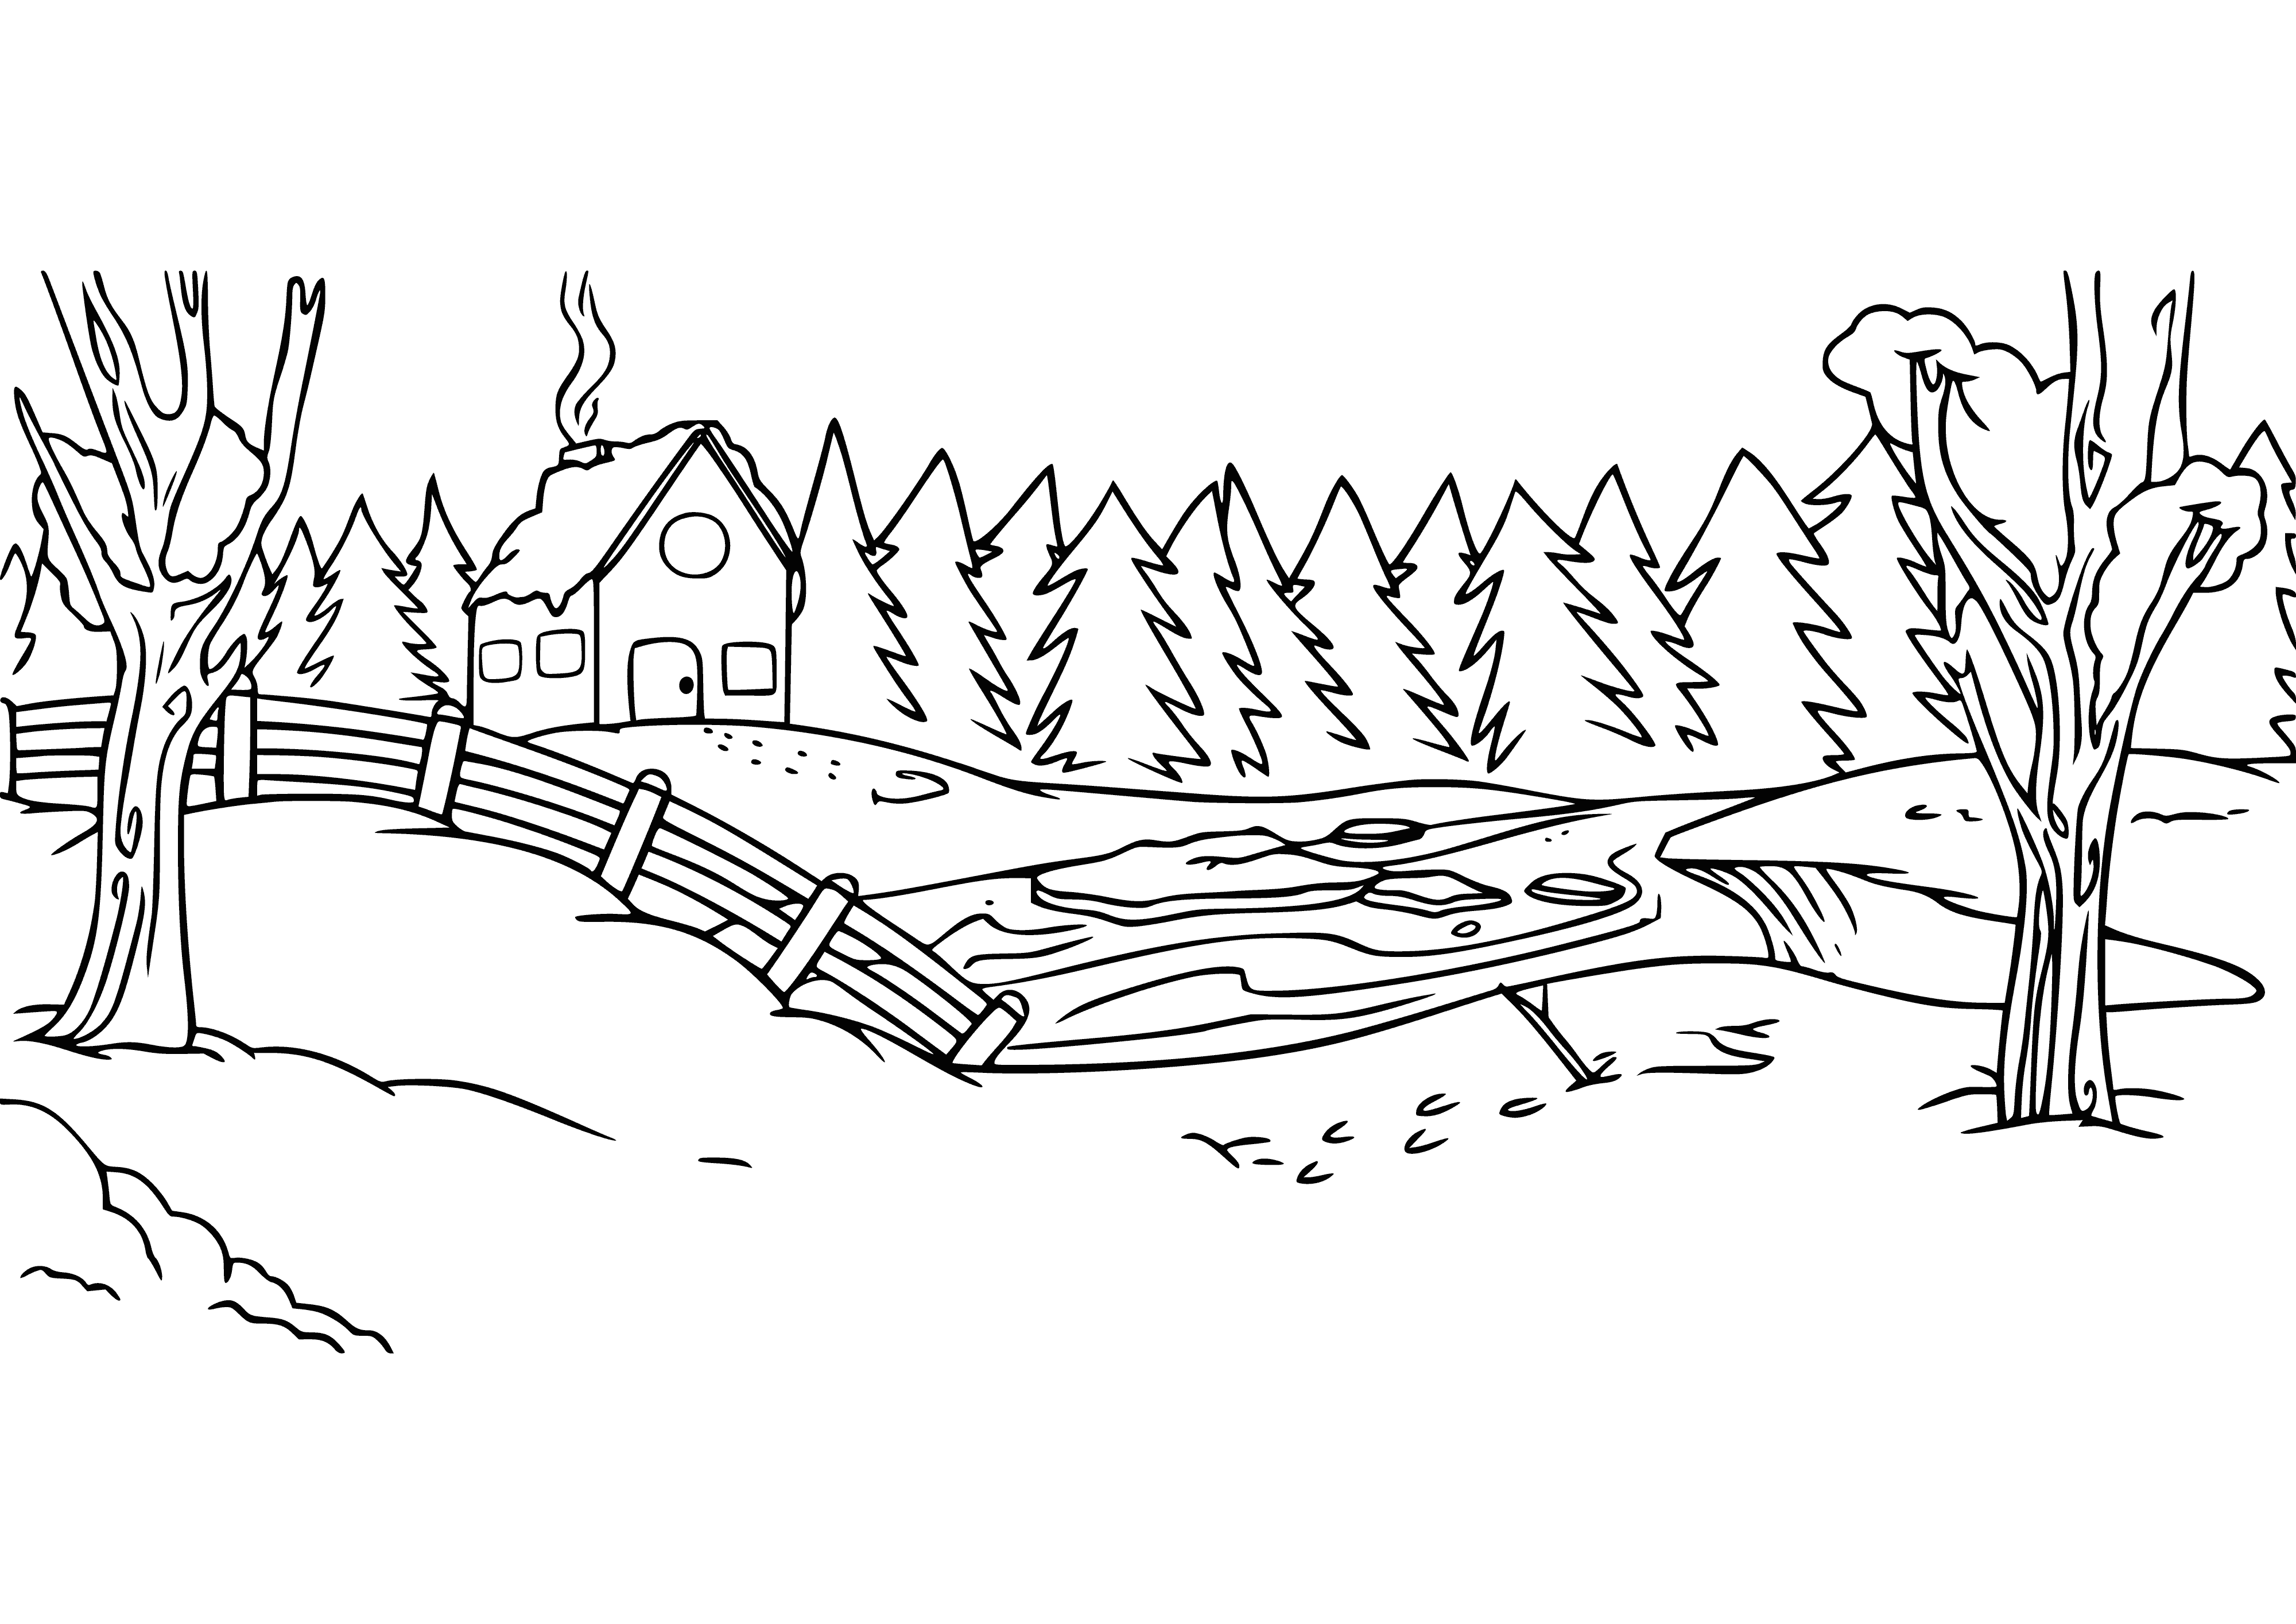 coloring page: Vast, icy landscape with mountains & hills. Ice shifting & cracking, deep blue sky with white clouds.